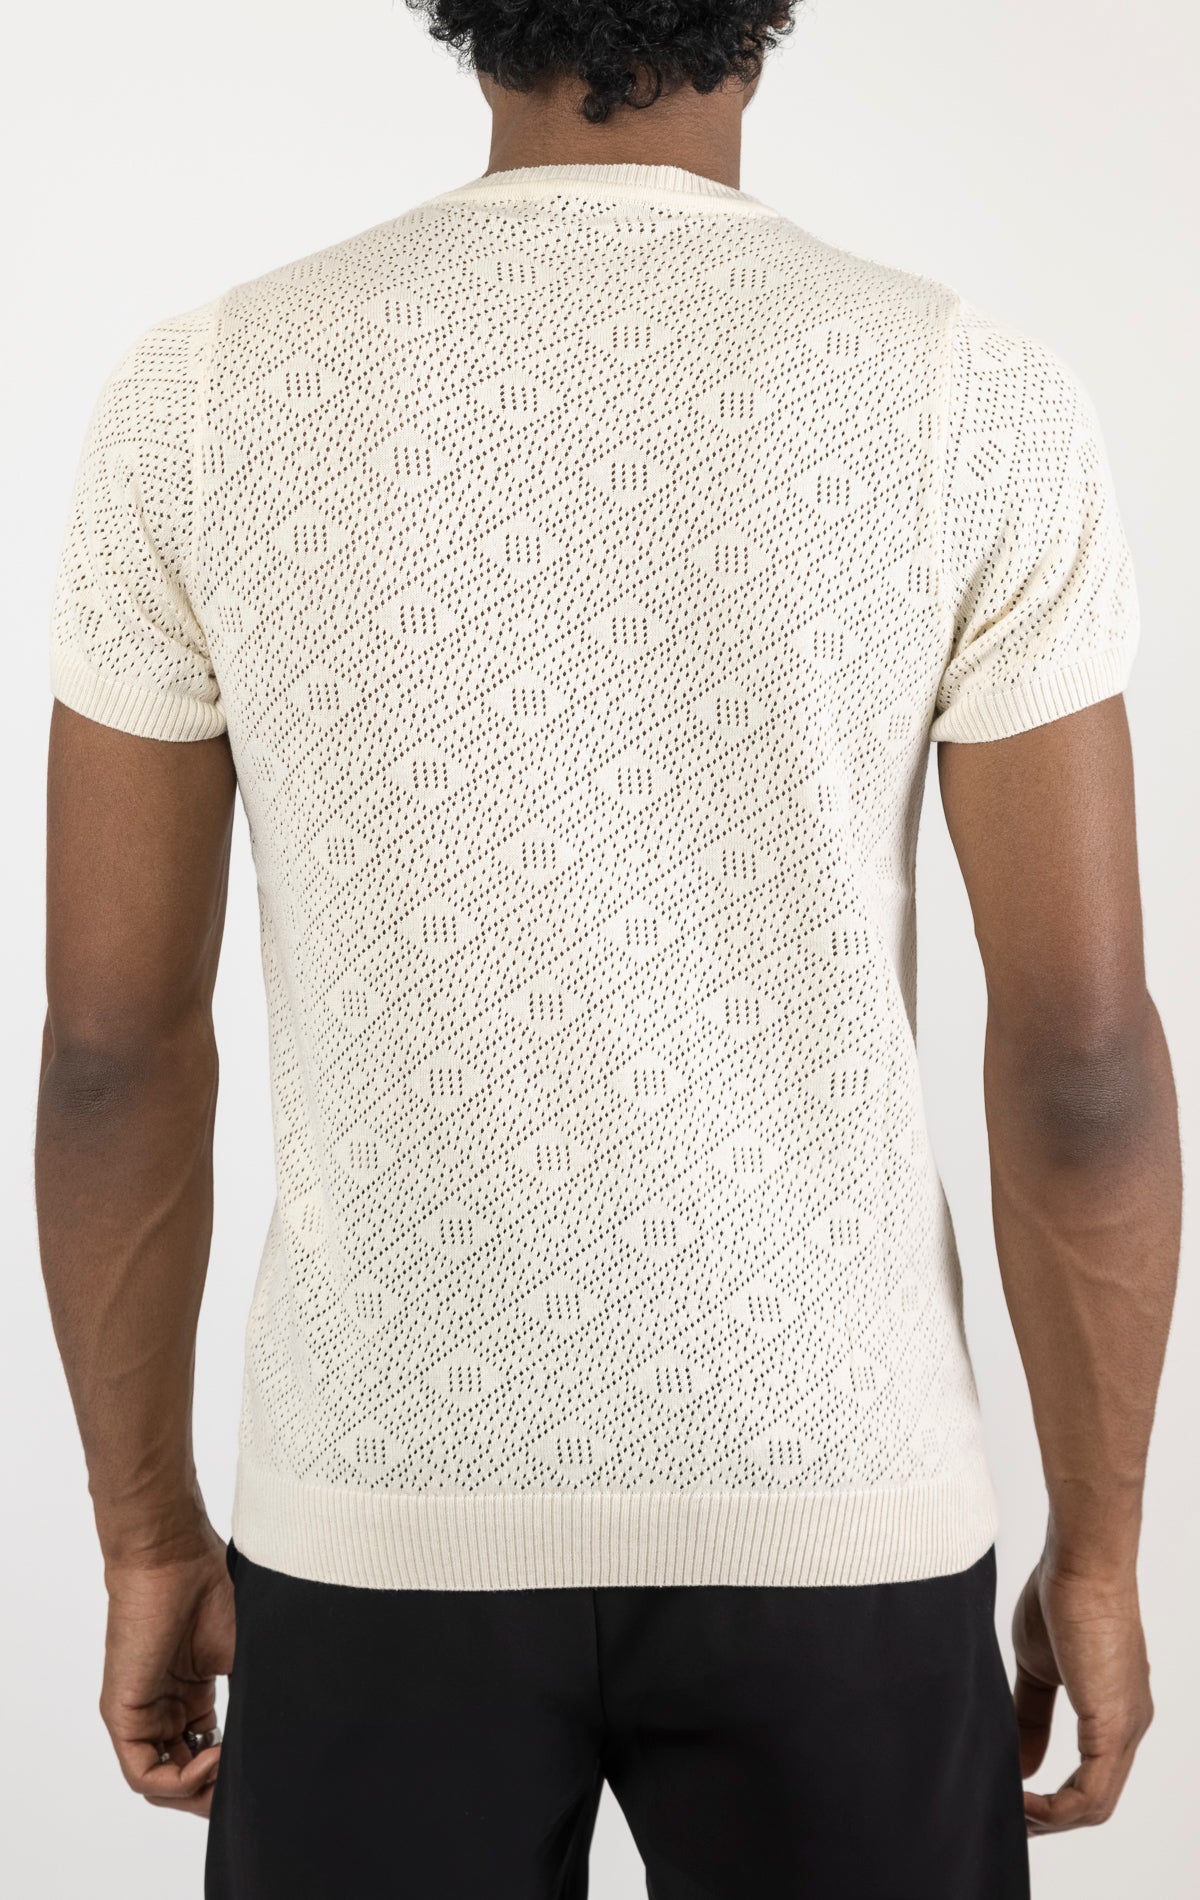 Women's geometric crochet knit top in beige. The top is made from a 50% viscose, 50% polyamide blend and features a unique geometric crochet pattern.